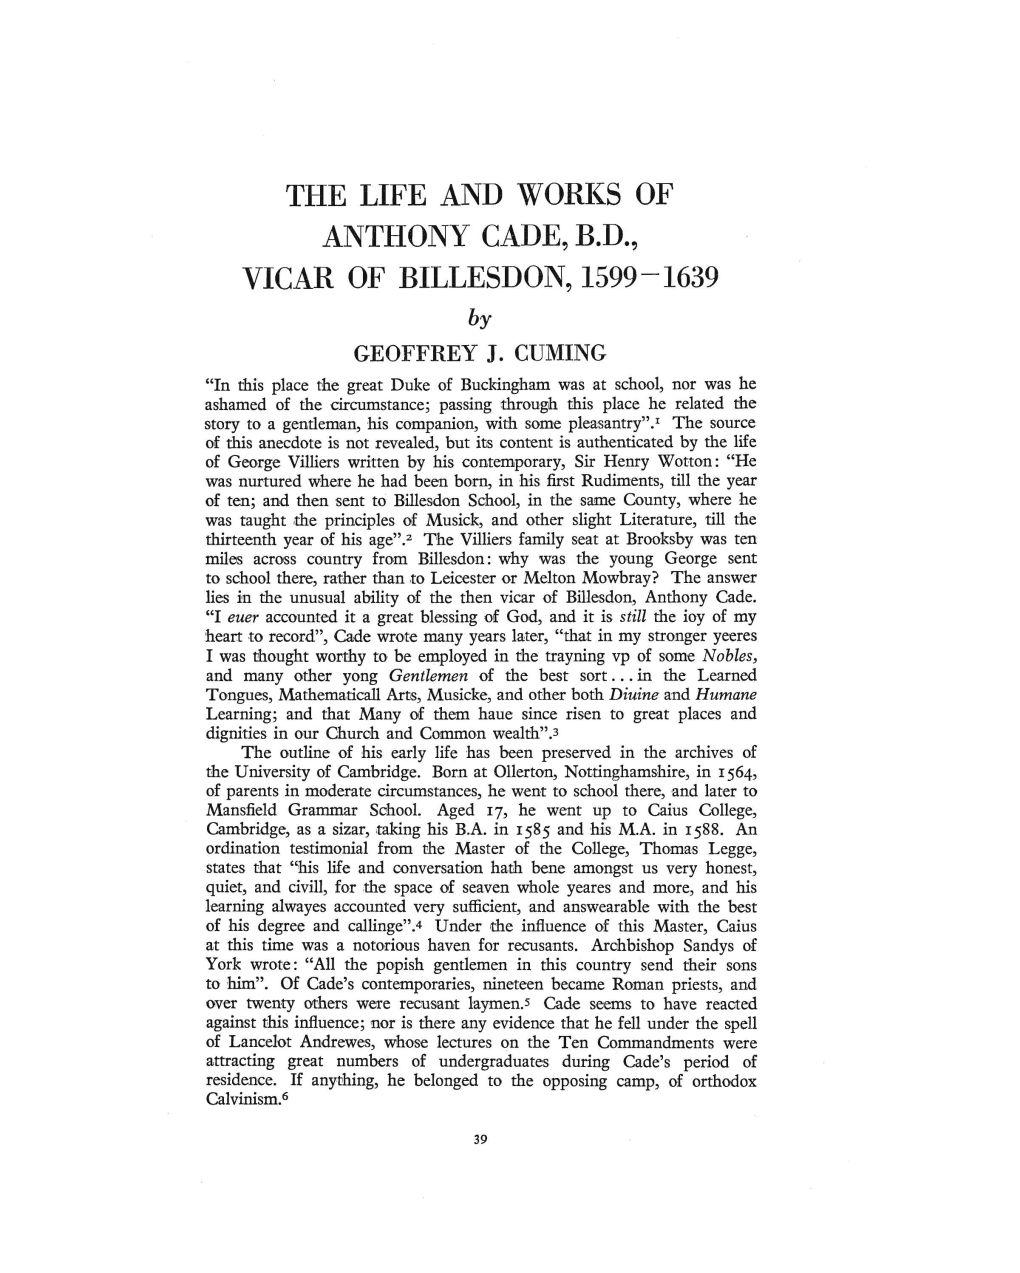 THE LIFE and WORI(S of ANTHONY CADE, B.D., VICAR of BILLESDON, 1599-1639 by GEOFFREY J